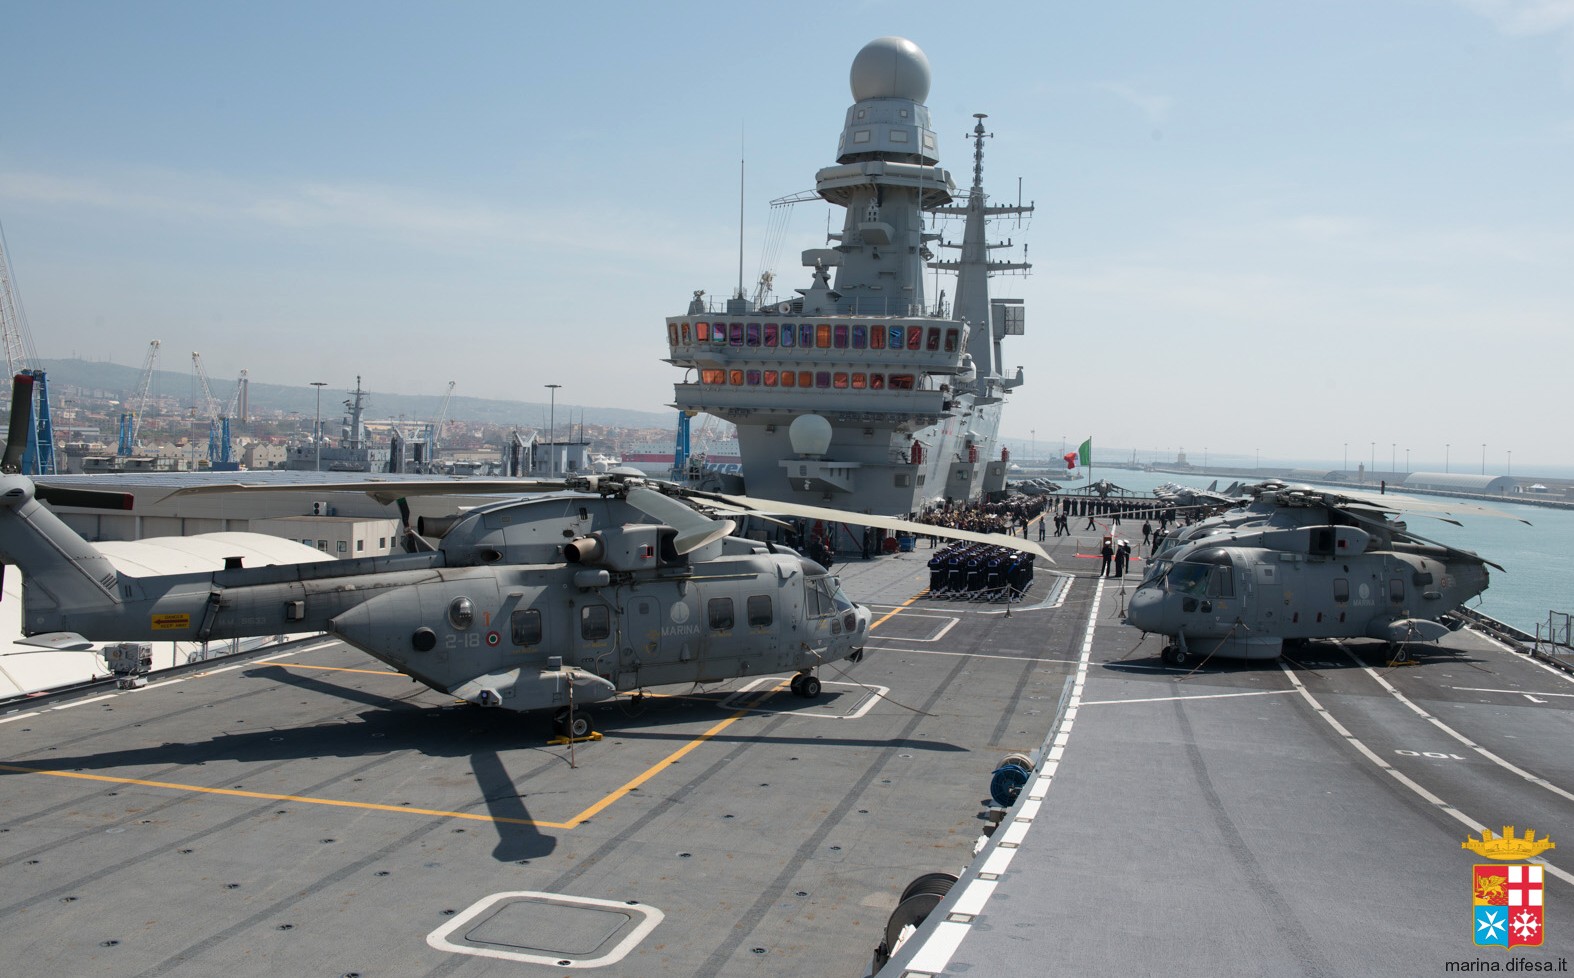 c-550 its cavour aircraft carrier italian navy marina militare 88 eh-101 aw-101 merlin